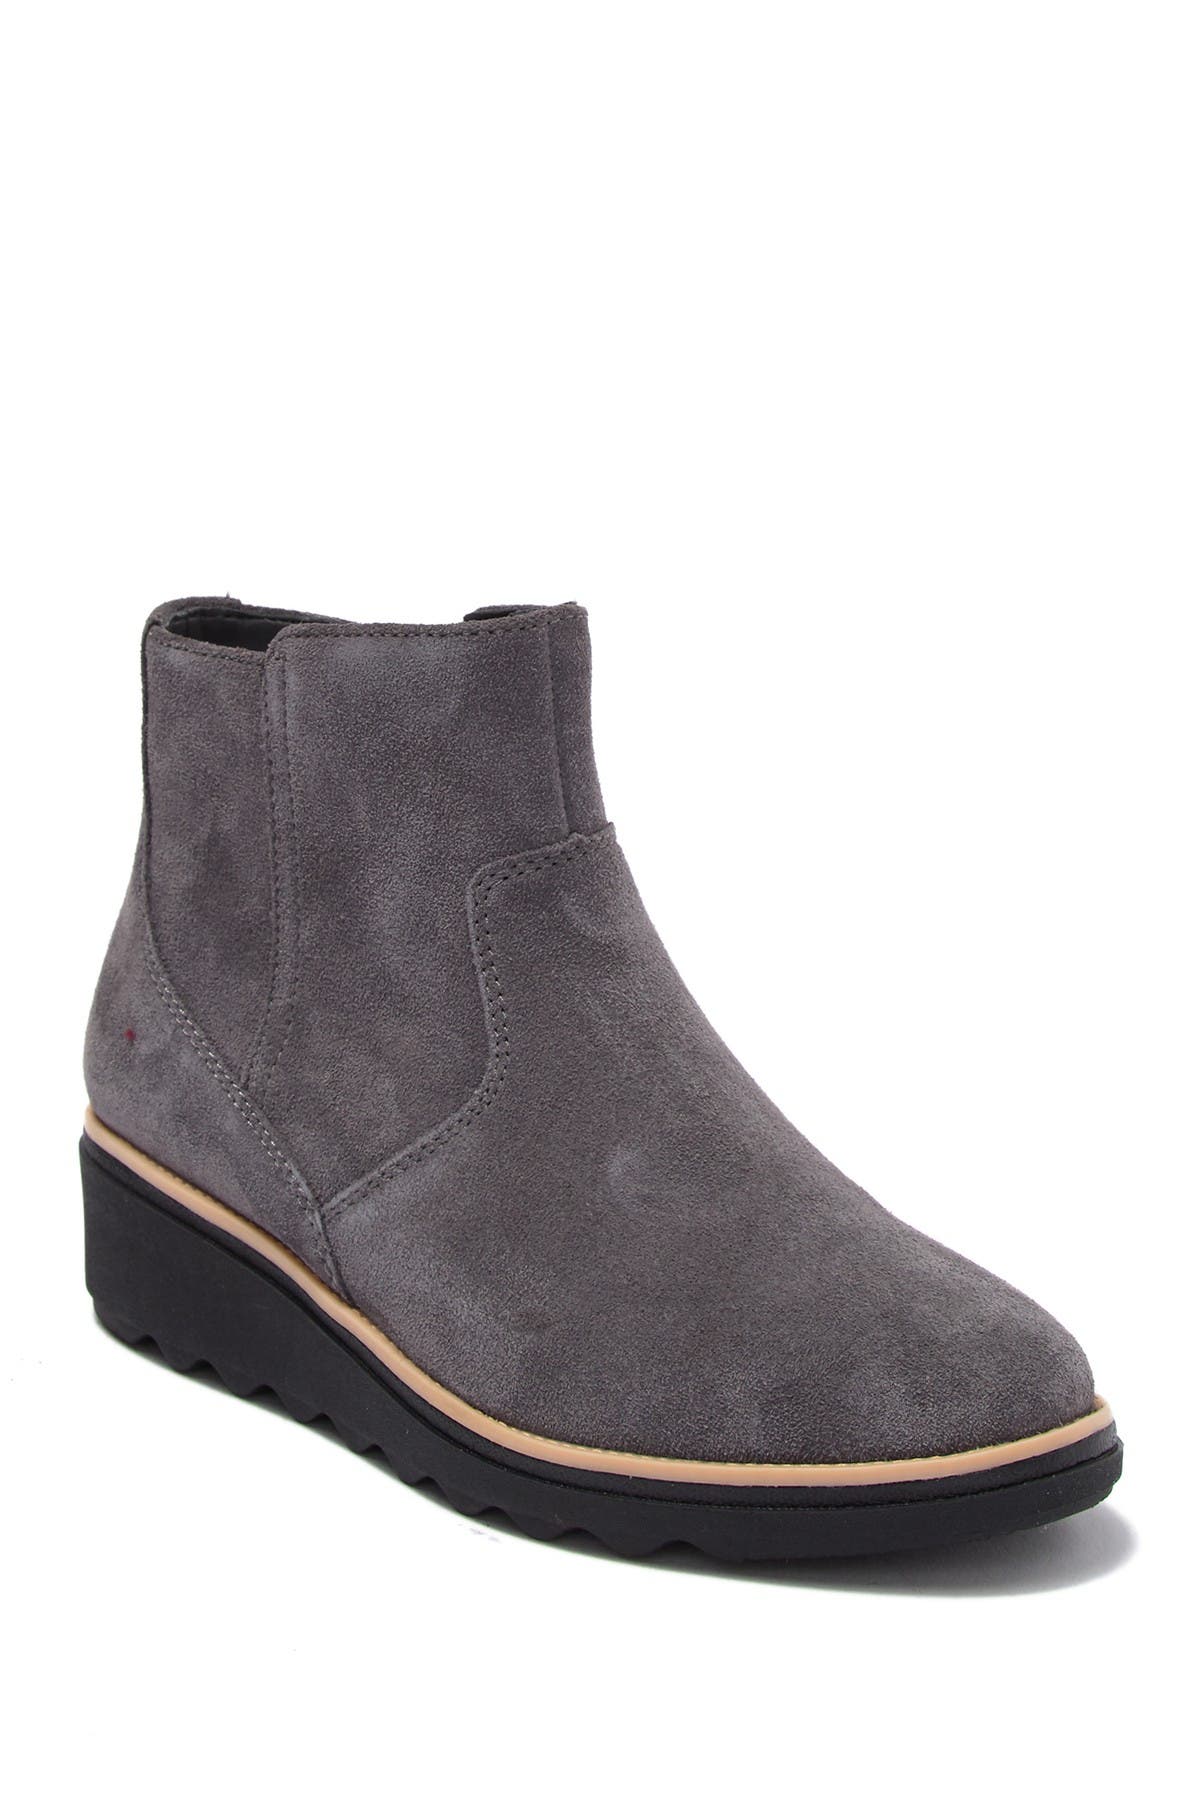 clarks wedge boots canada